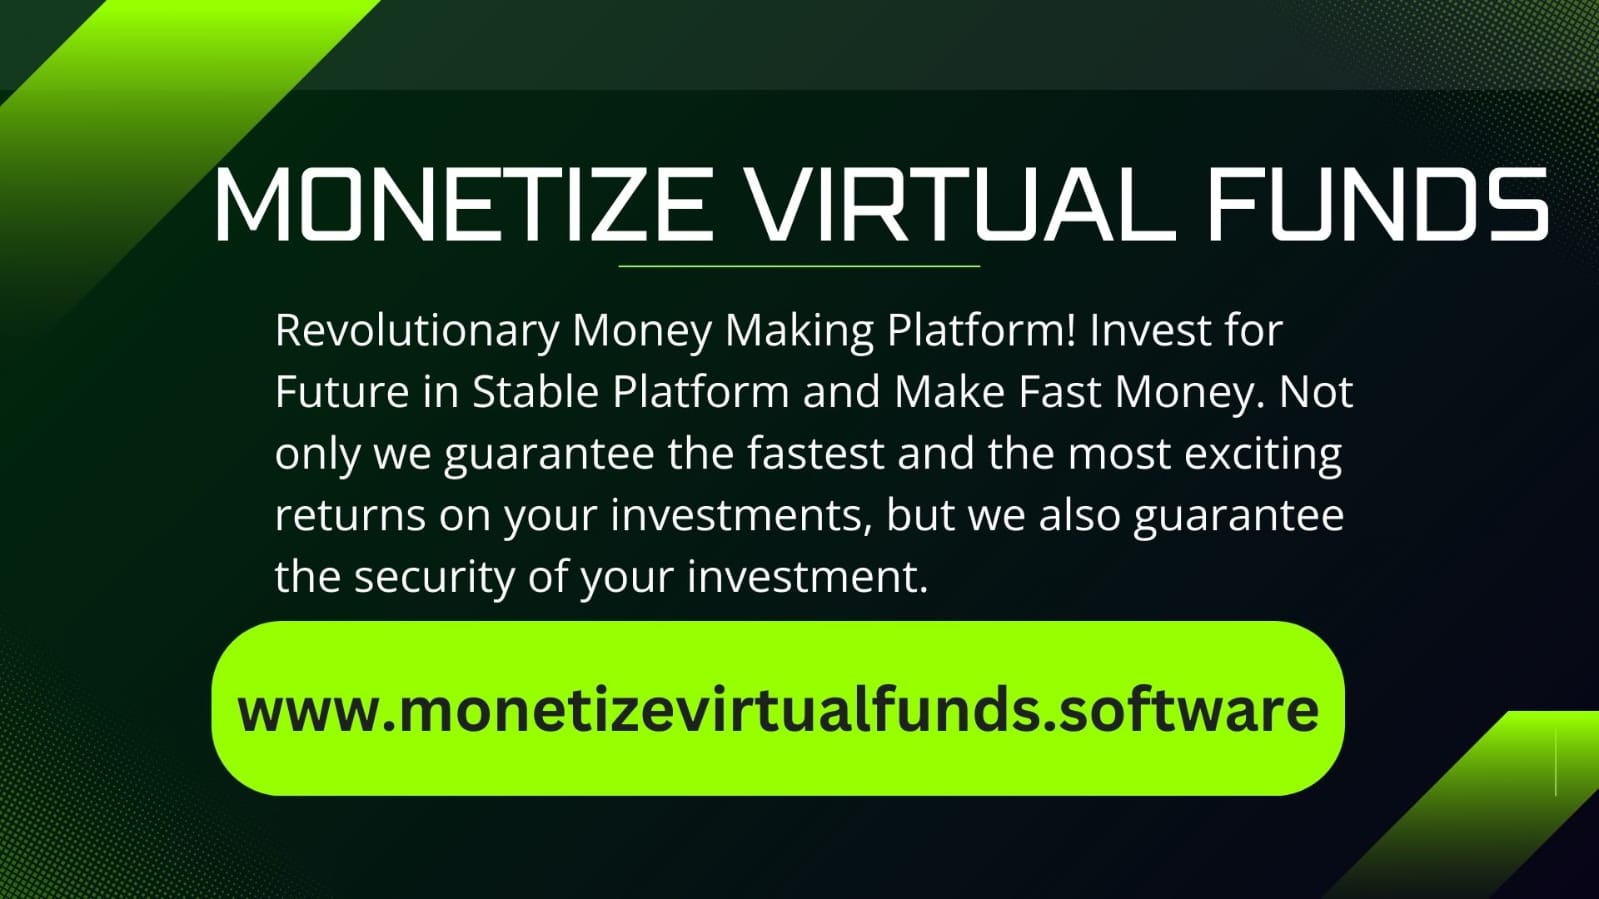 revolutionary-money-making-with-monetize-virtual-funds startups ipo